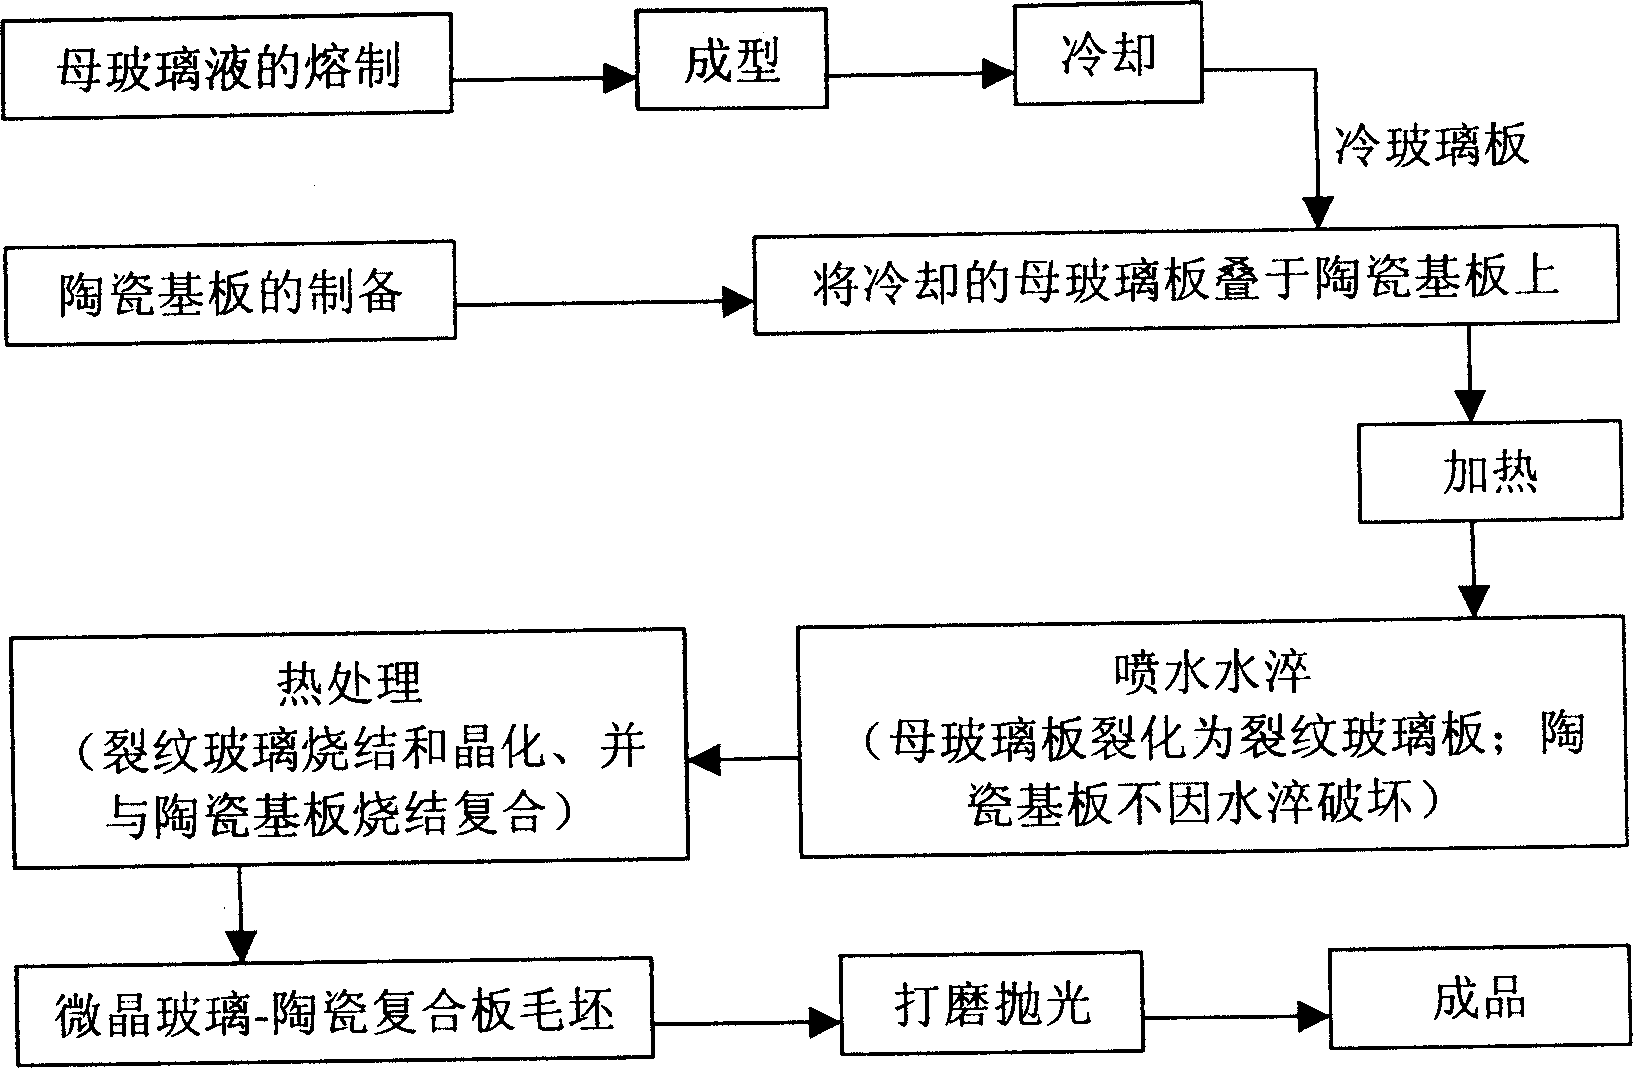 Process for preparing microcrystal glass-ceramic compounded plate